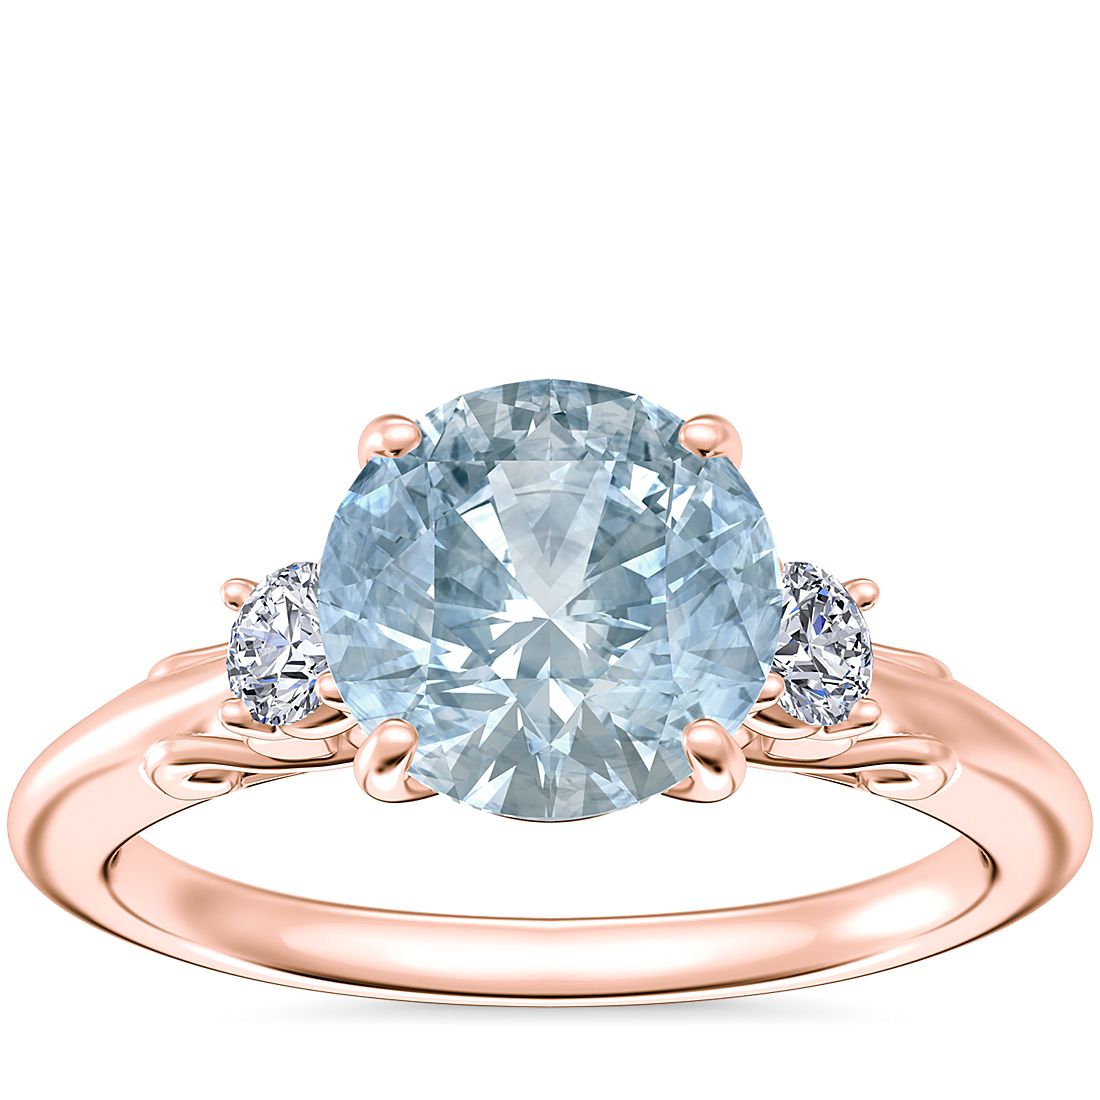 Vintage Three Stone Engagement Ring with Round Aquamarine in 18k Rose Gold (8mm)